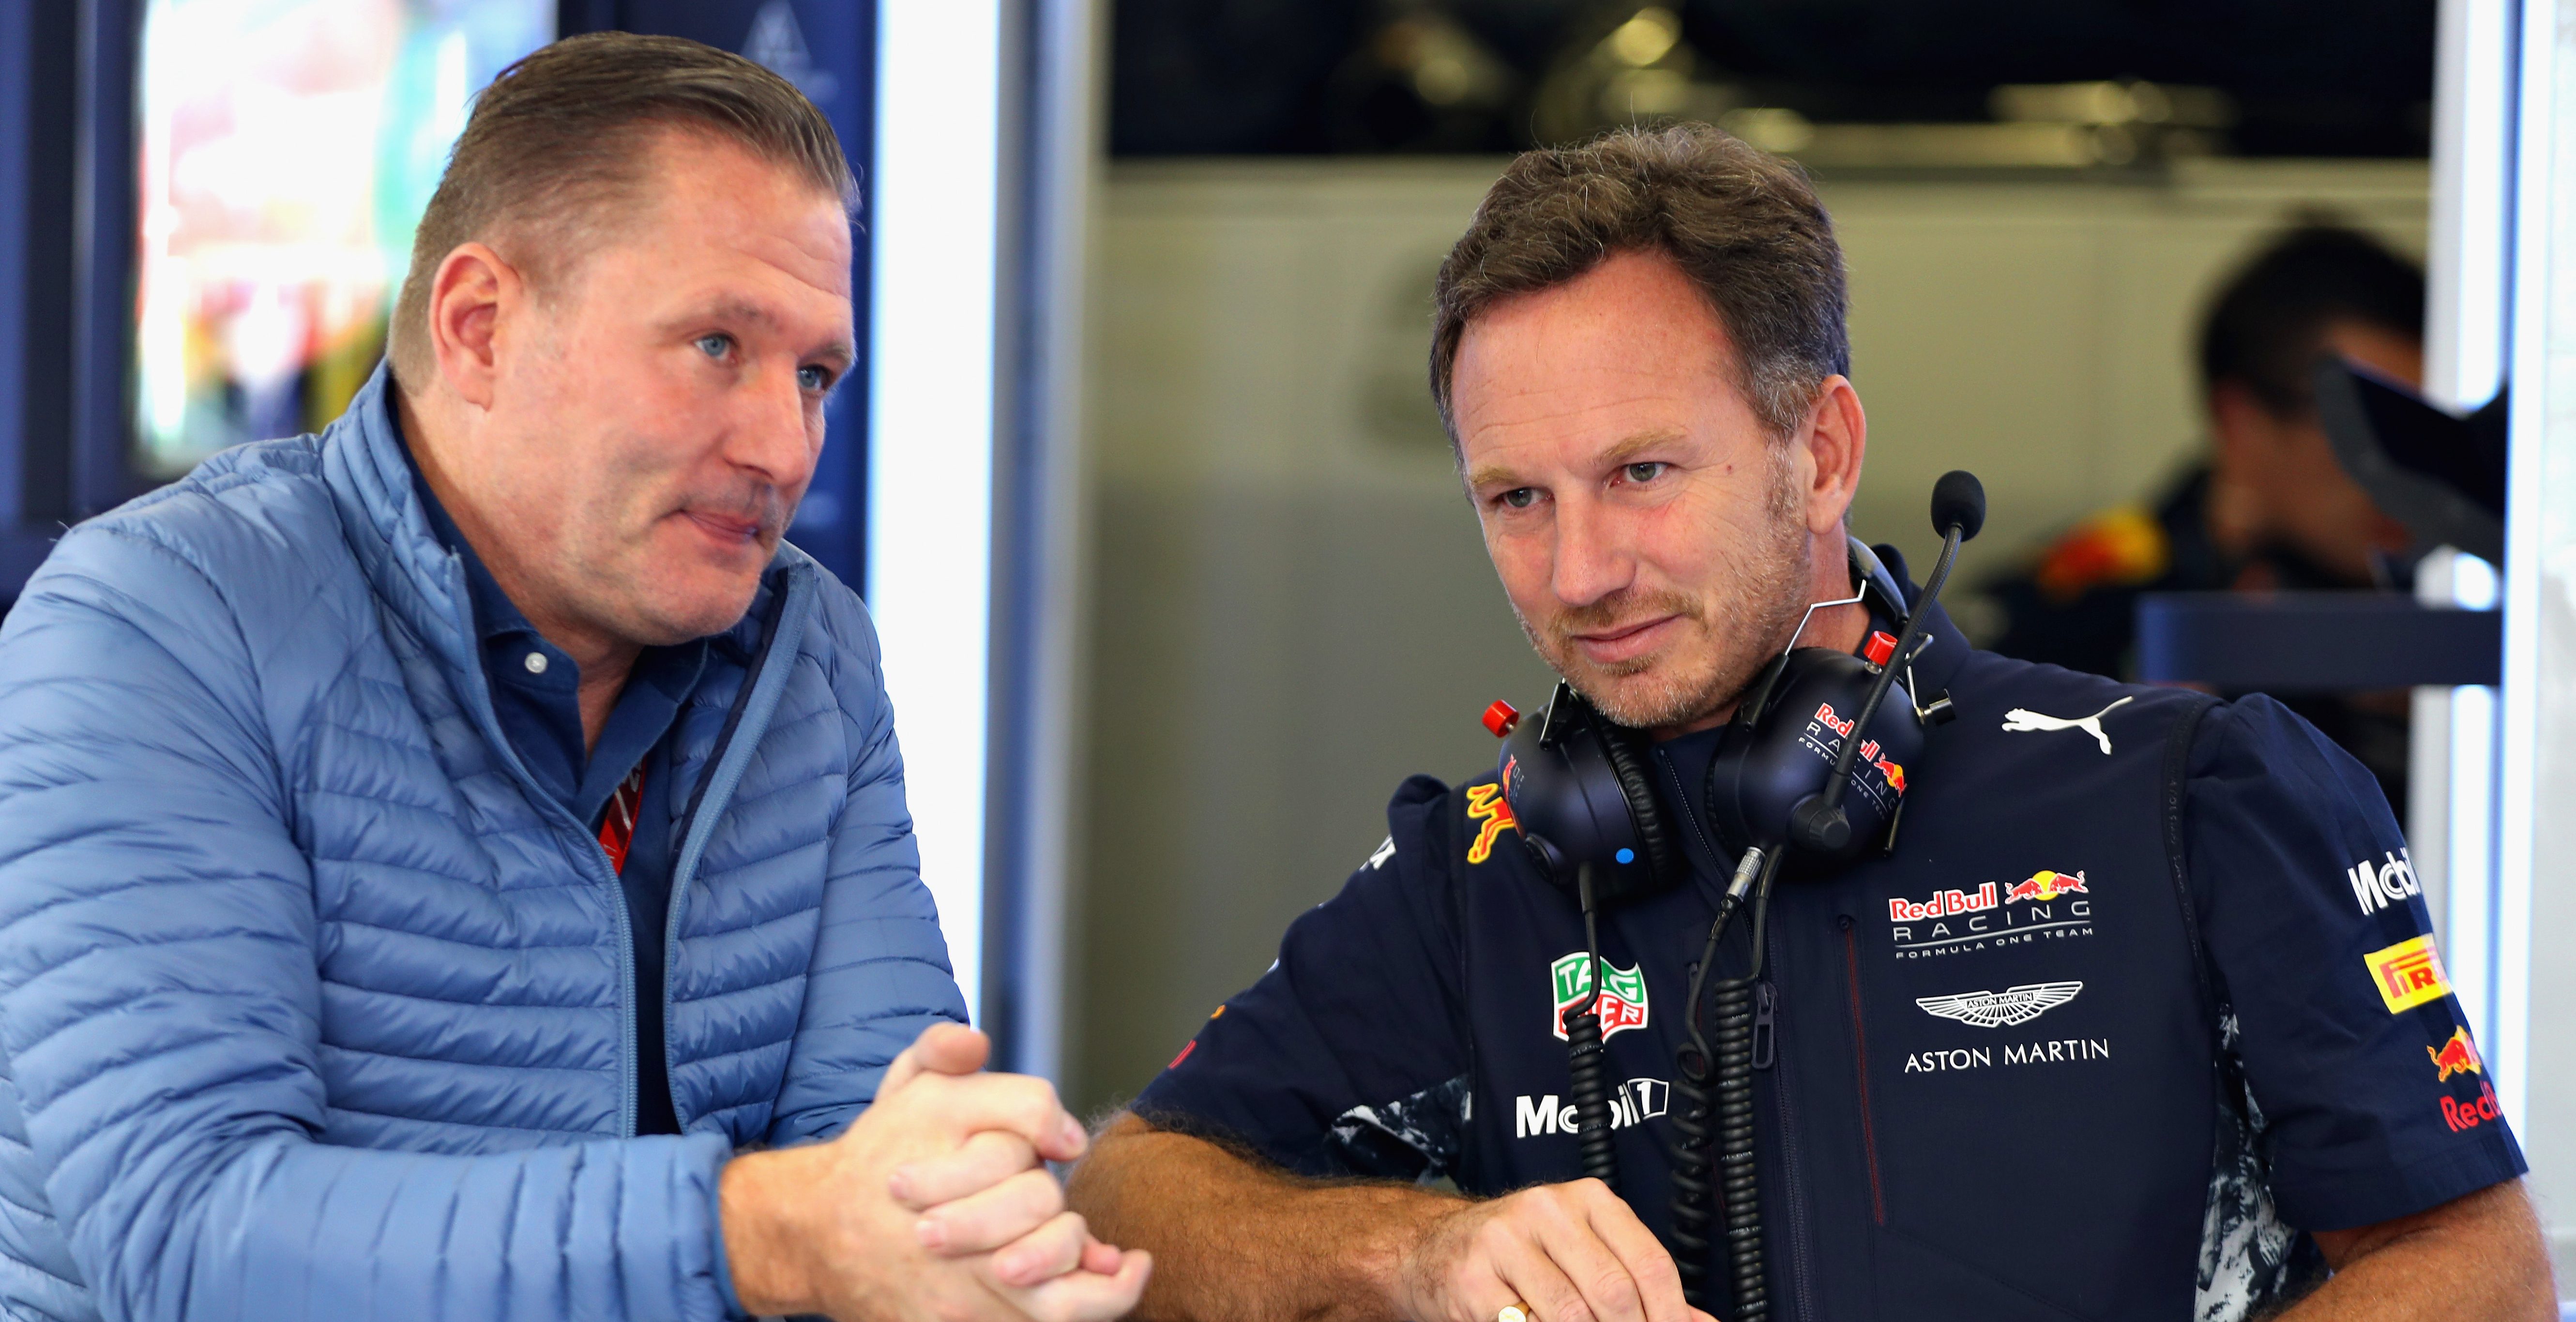 MEXICO CITY, MEXICO - OCTOBER 27: Red Bull Racing Team Principal Christian Horner talks with Jos Verstappen in the Red Bull Racing garage during practice for the Formula One Grand Prix of Mexico at Autodromo Hermanos Rodriguez on October 27, 2017 in Mexico City, Mexico.